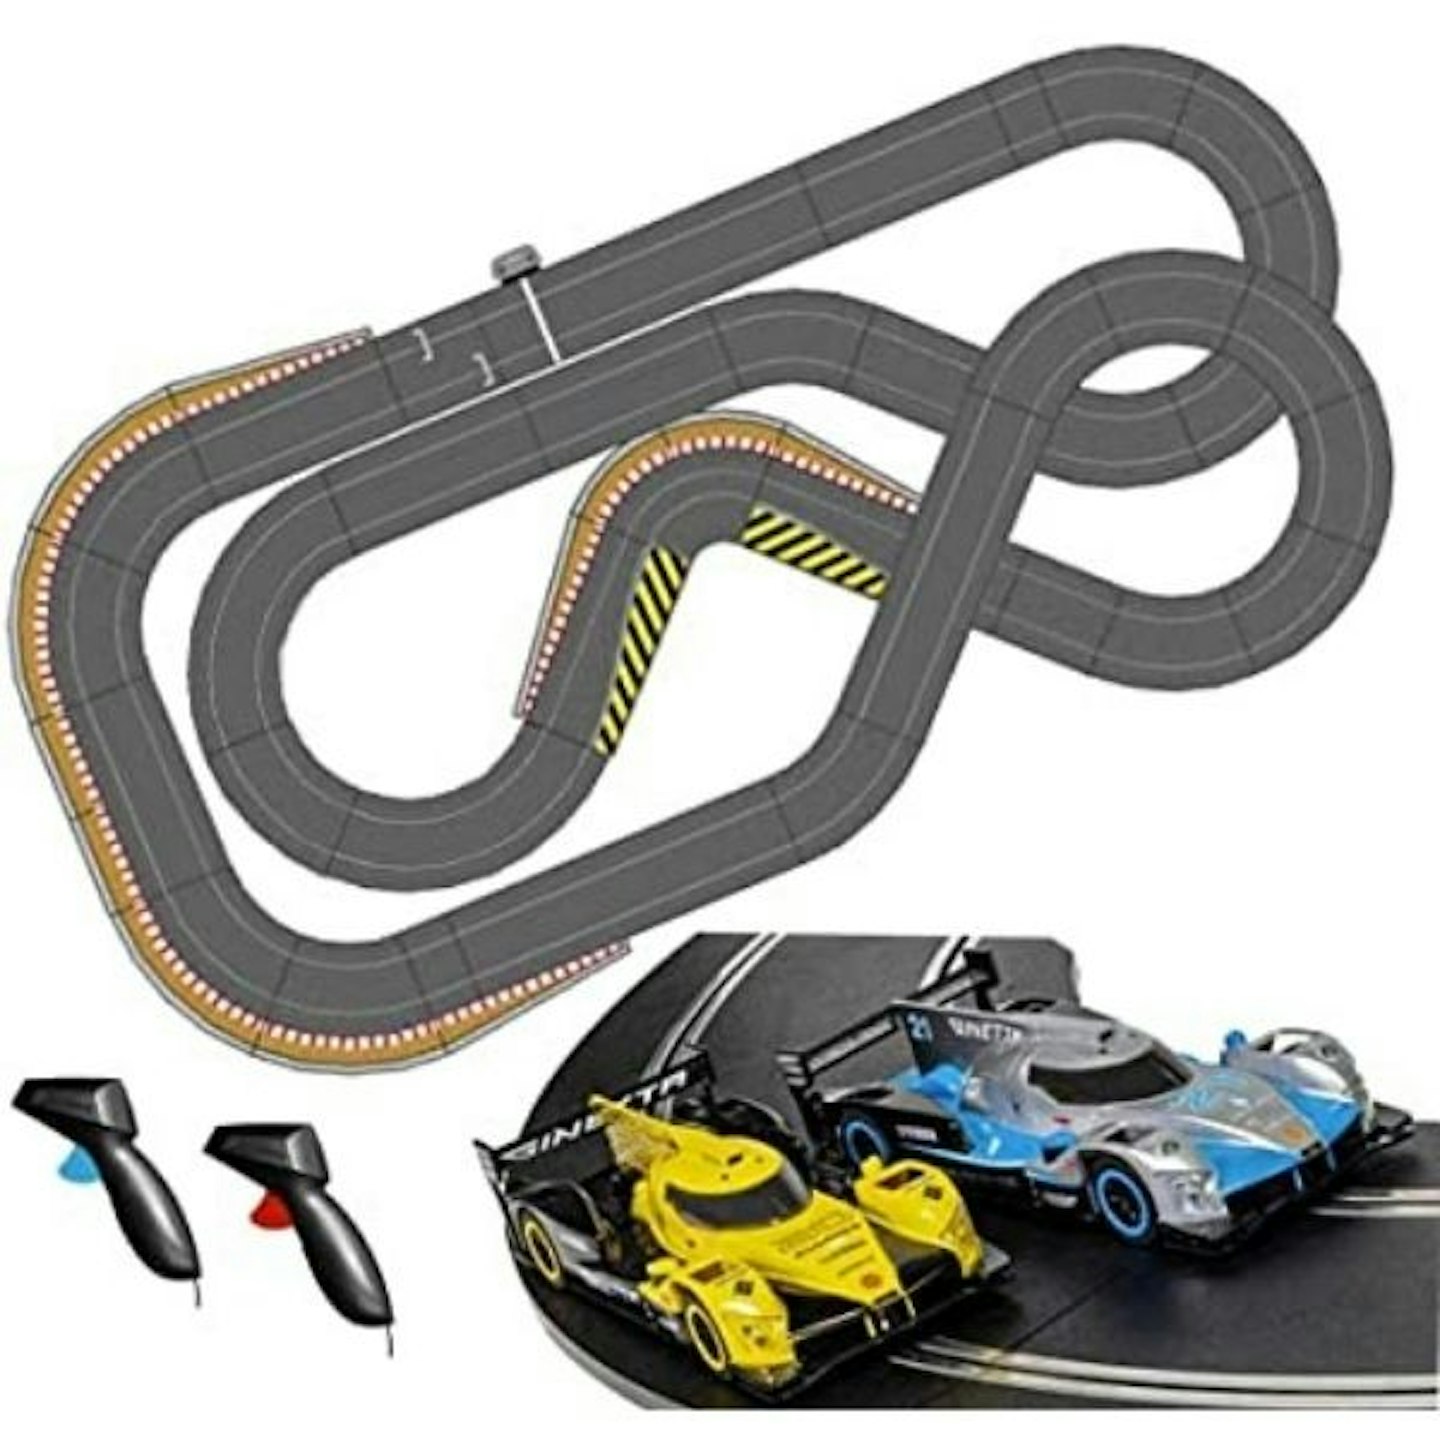 Scalextric Ginetta G60 LMP Cars Extended Layout